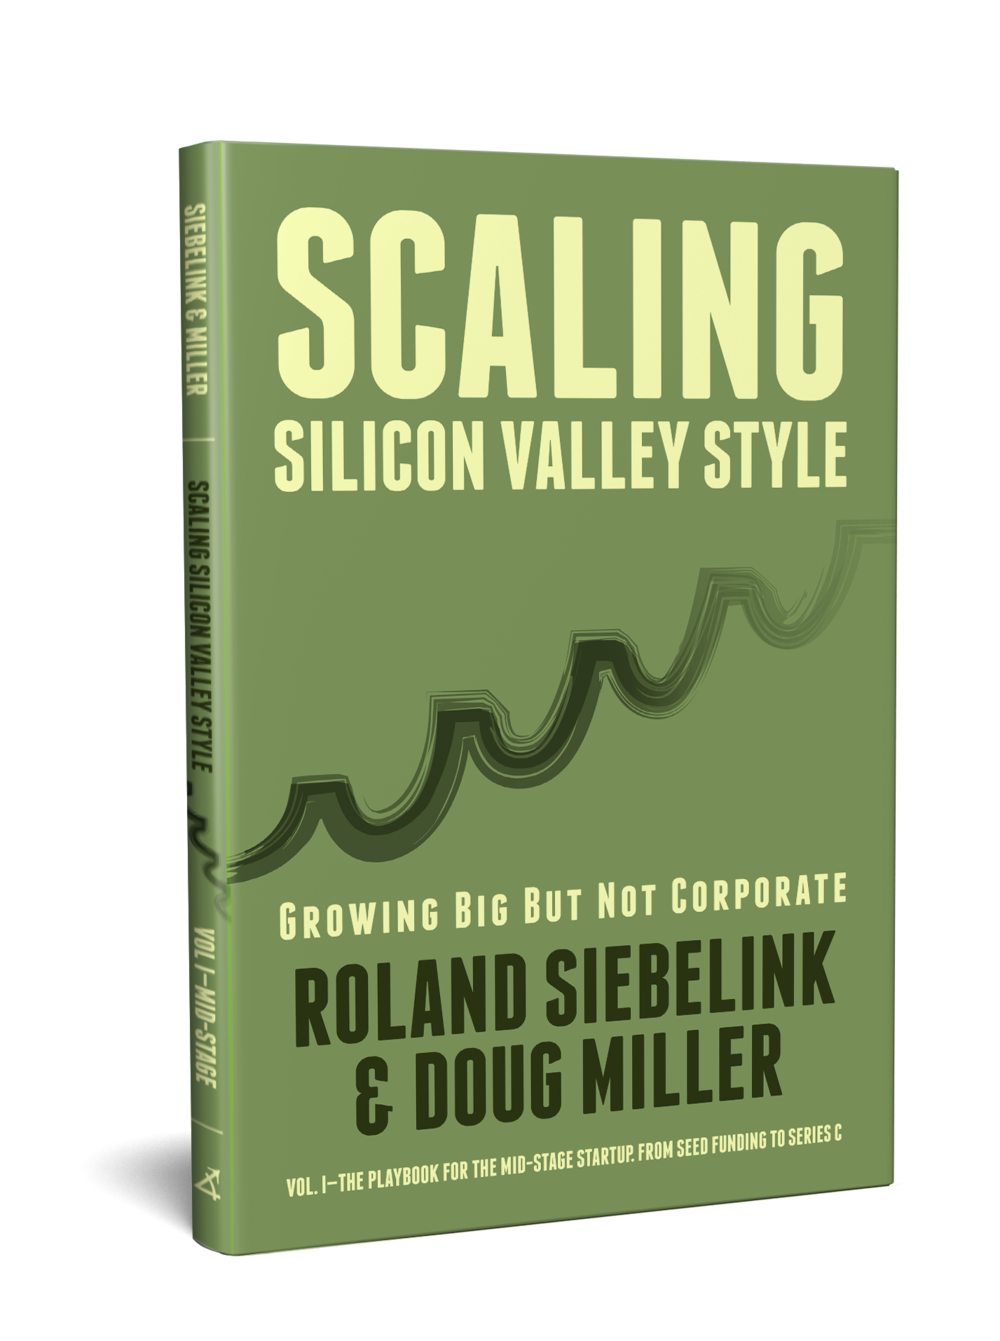 Scaling Silicon Valley Book Mockup